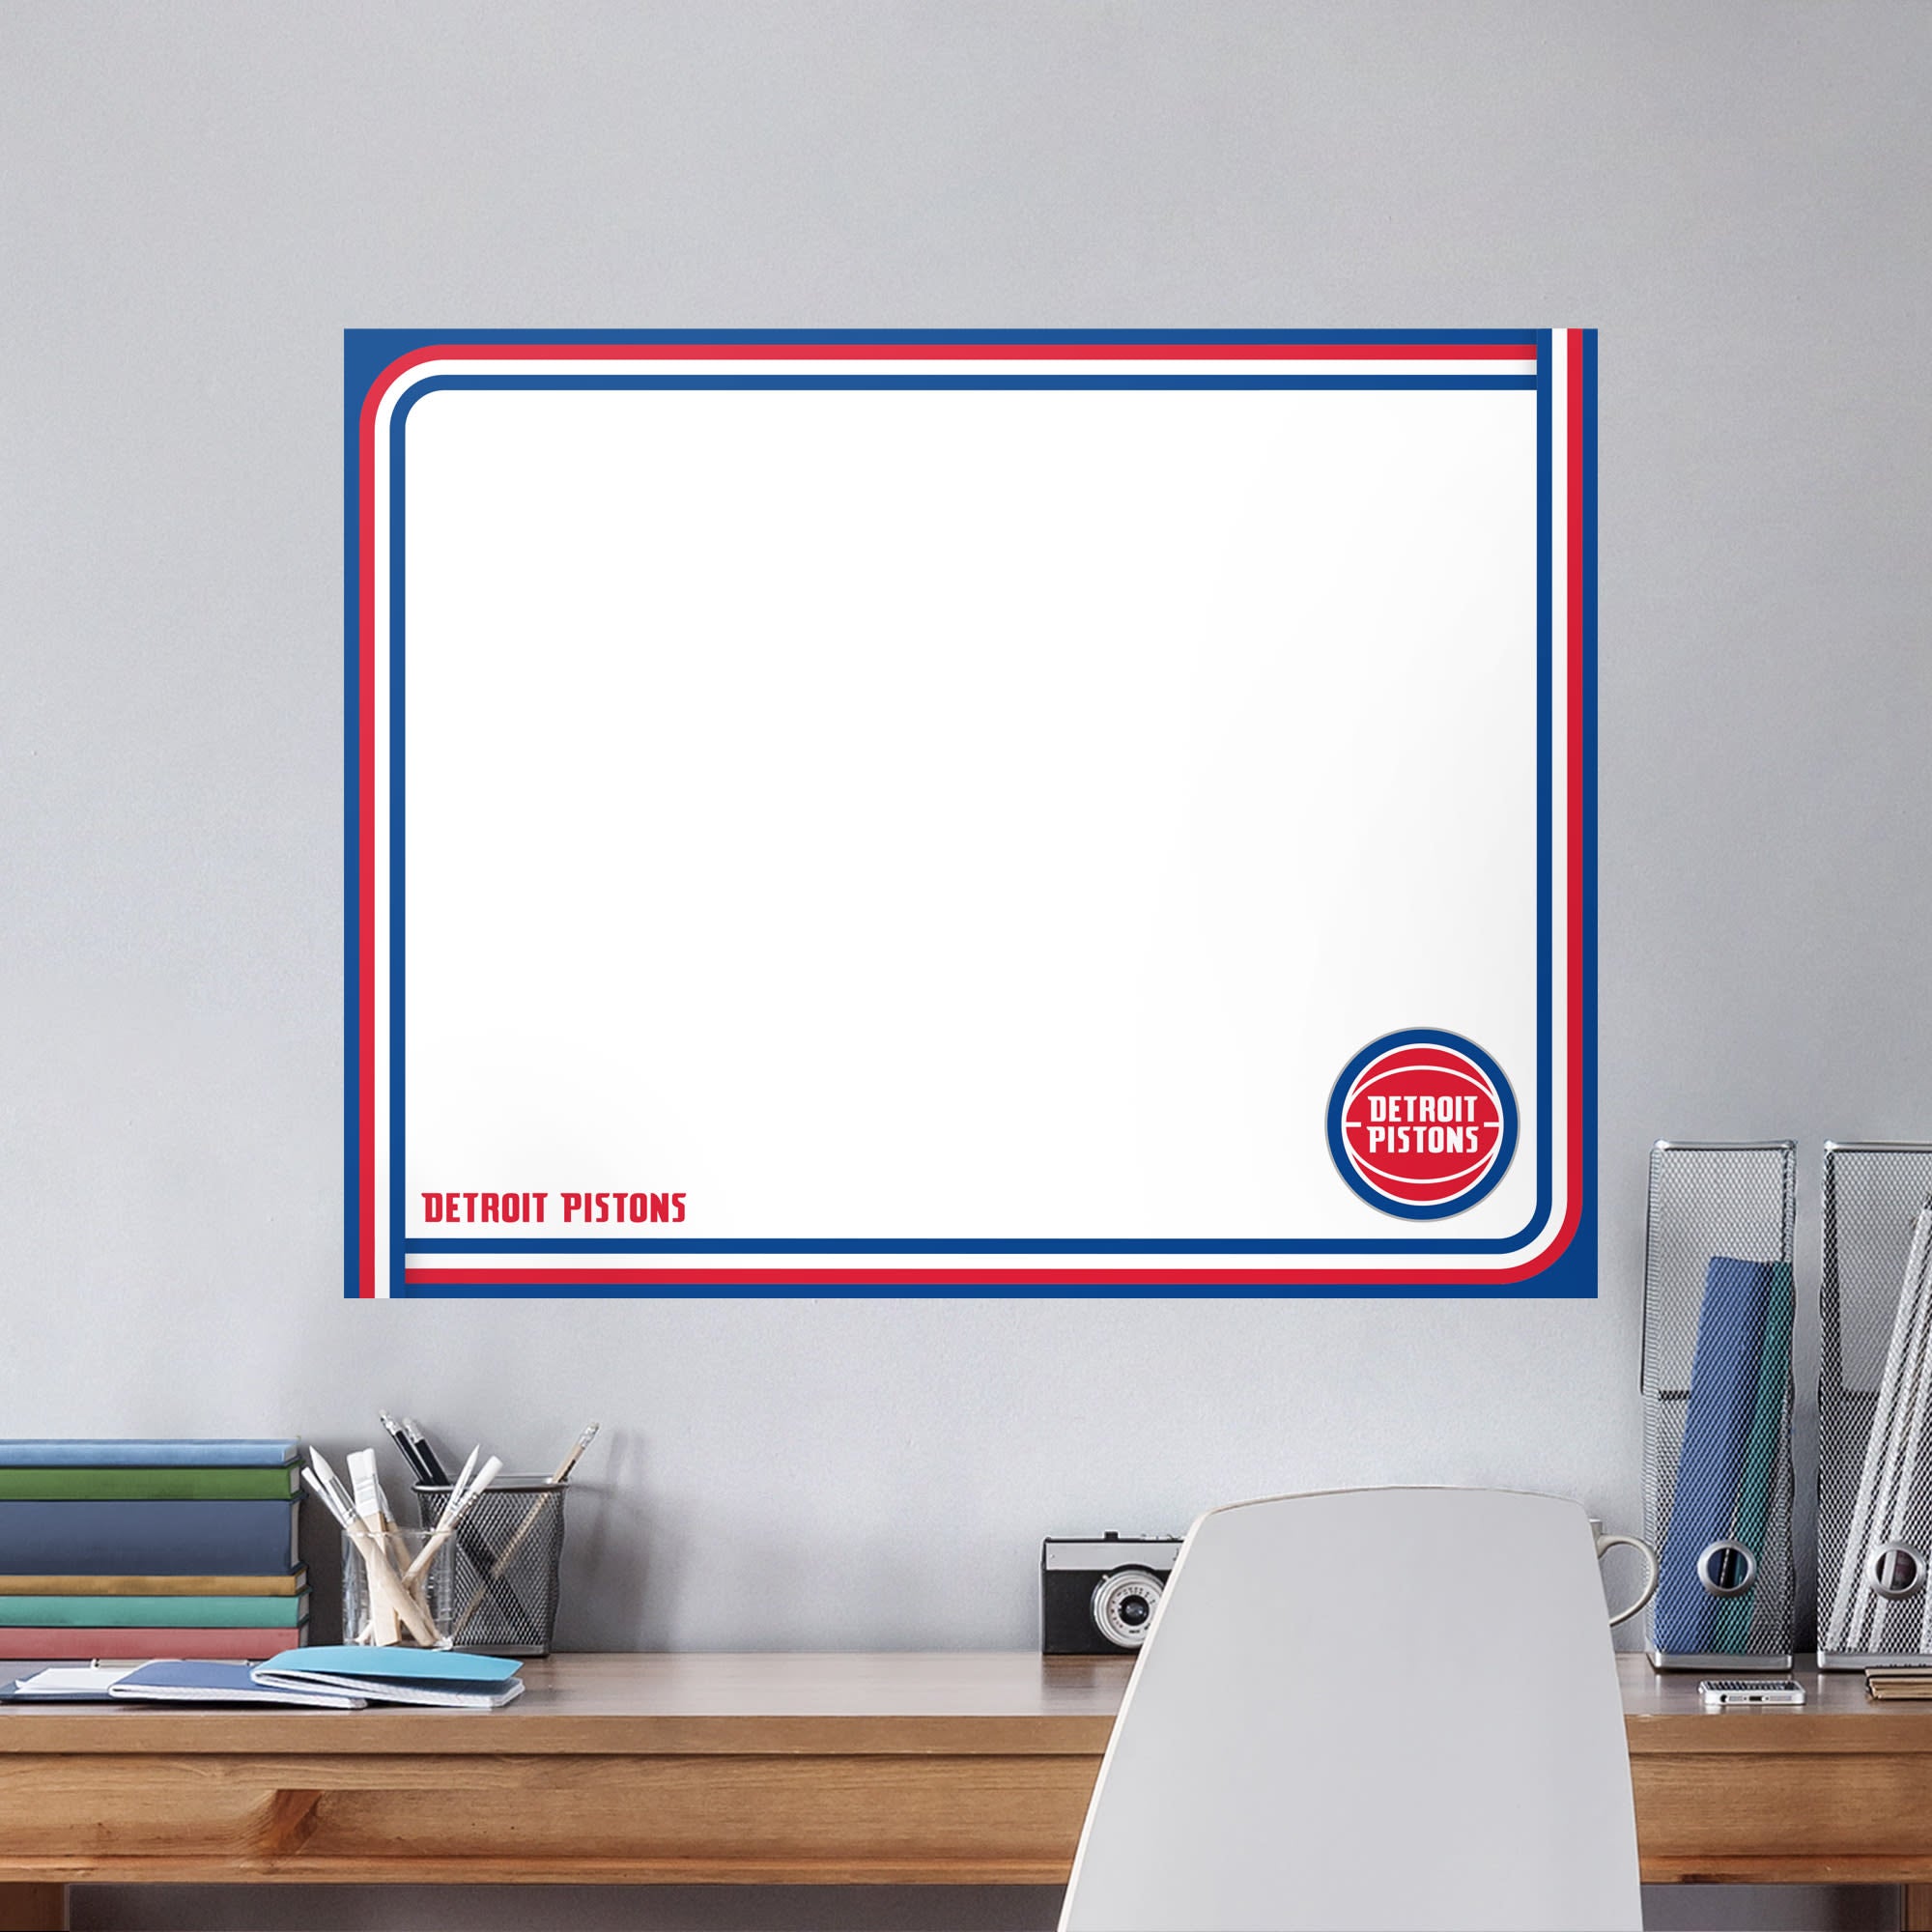 Detroit Pistons for Detroit Pistons: Dry Erase Whiteboard - Officially Licensed NBA Removable Wall Decal XL by Fathead | Vinyl